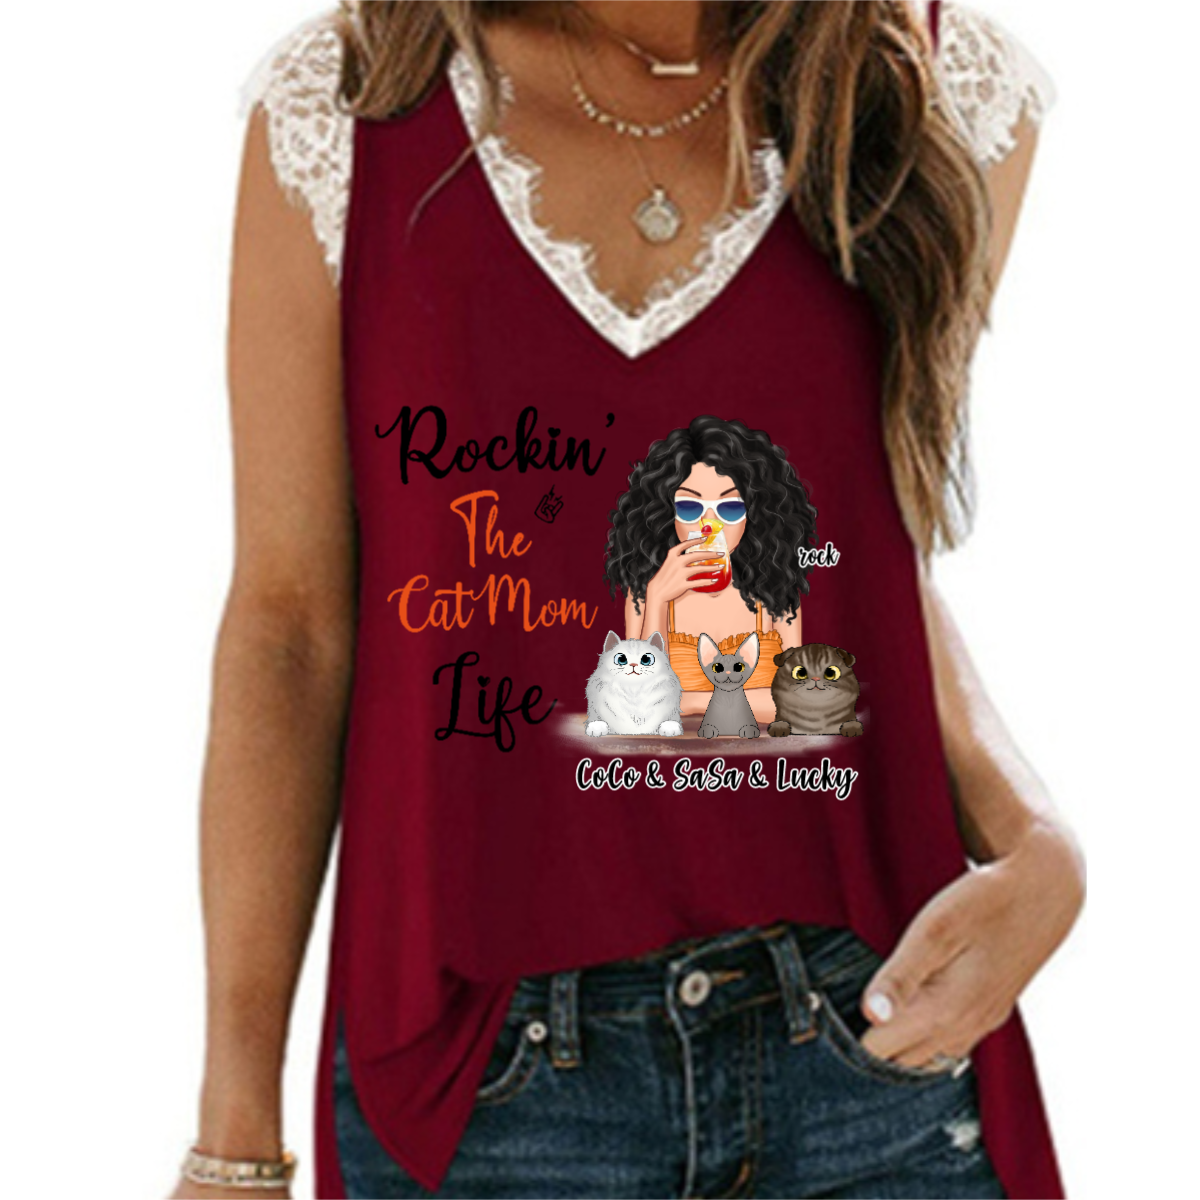 Rockin‘ Cat Mom Life Cocktail Girl Personalized Women Tank Top V Neck Lace